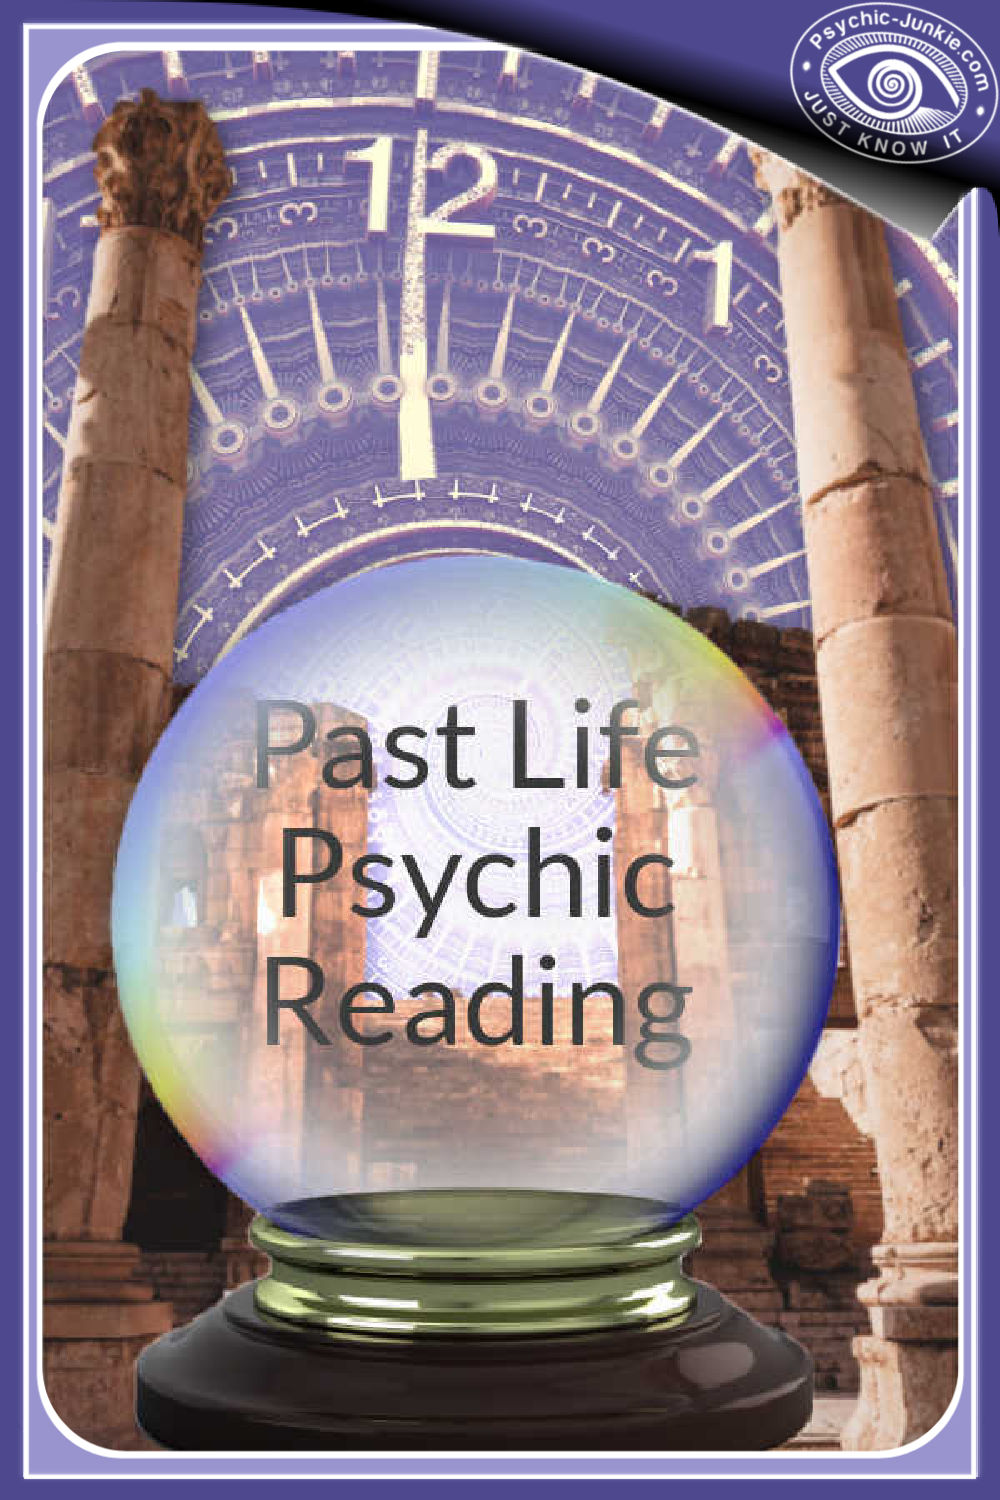 A True Past Life Psychic Reading